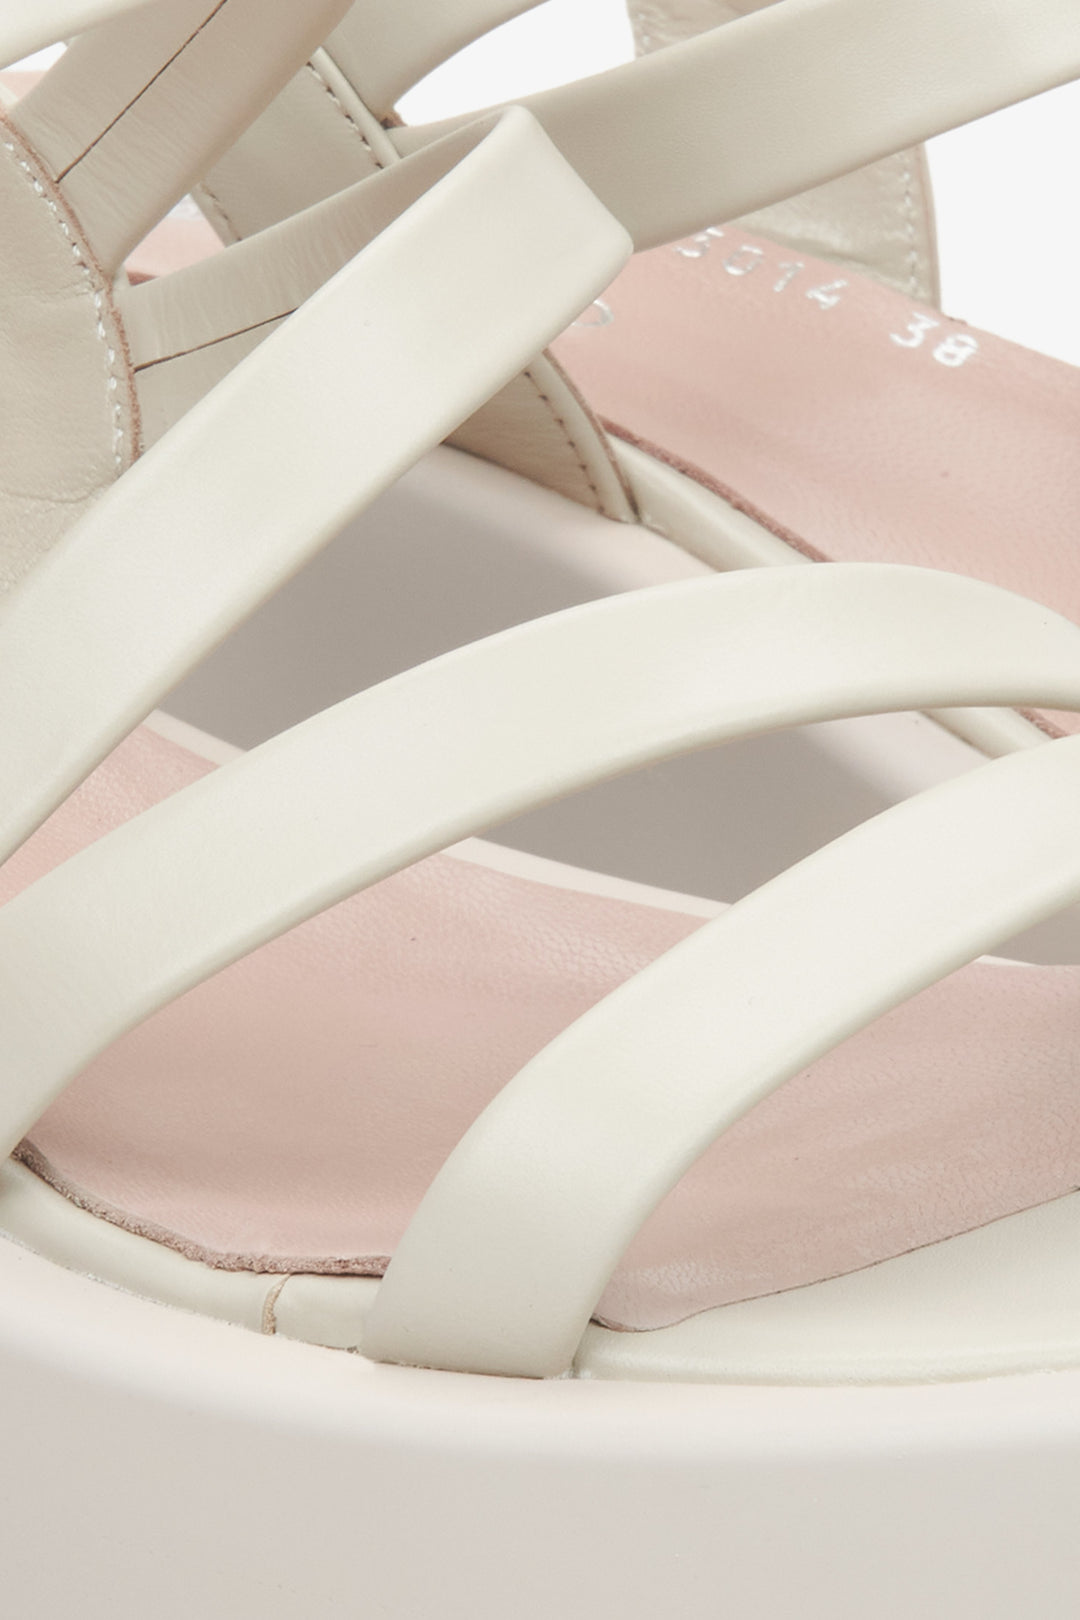 Women's leather light beige sandals by Estro - close-up on the detail.